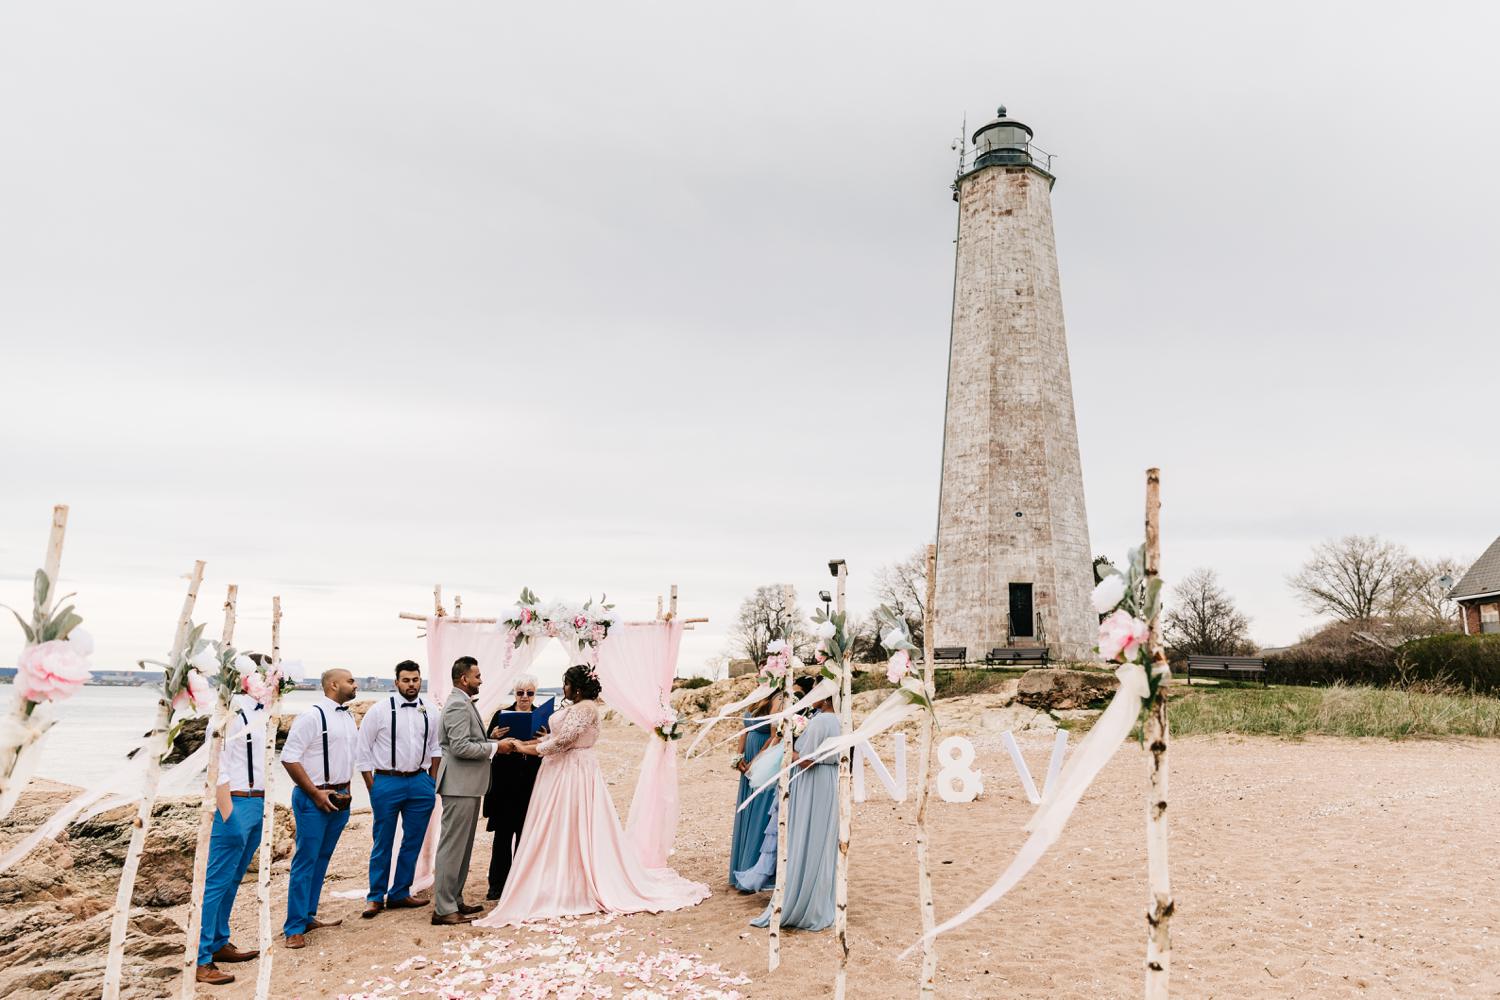 Beach ceremony set up with floral decorations